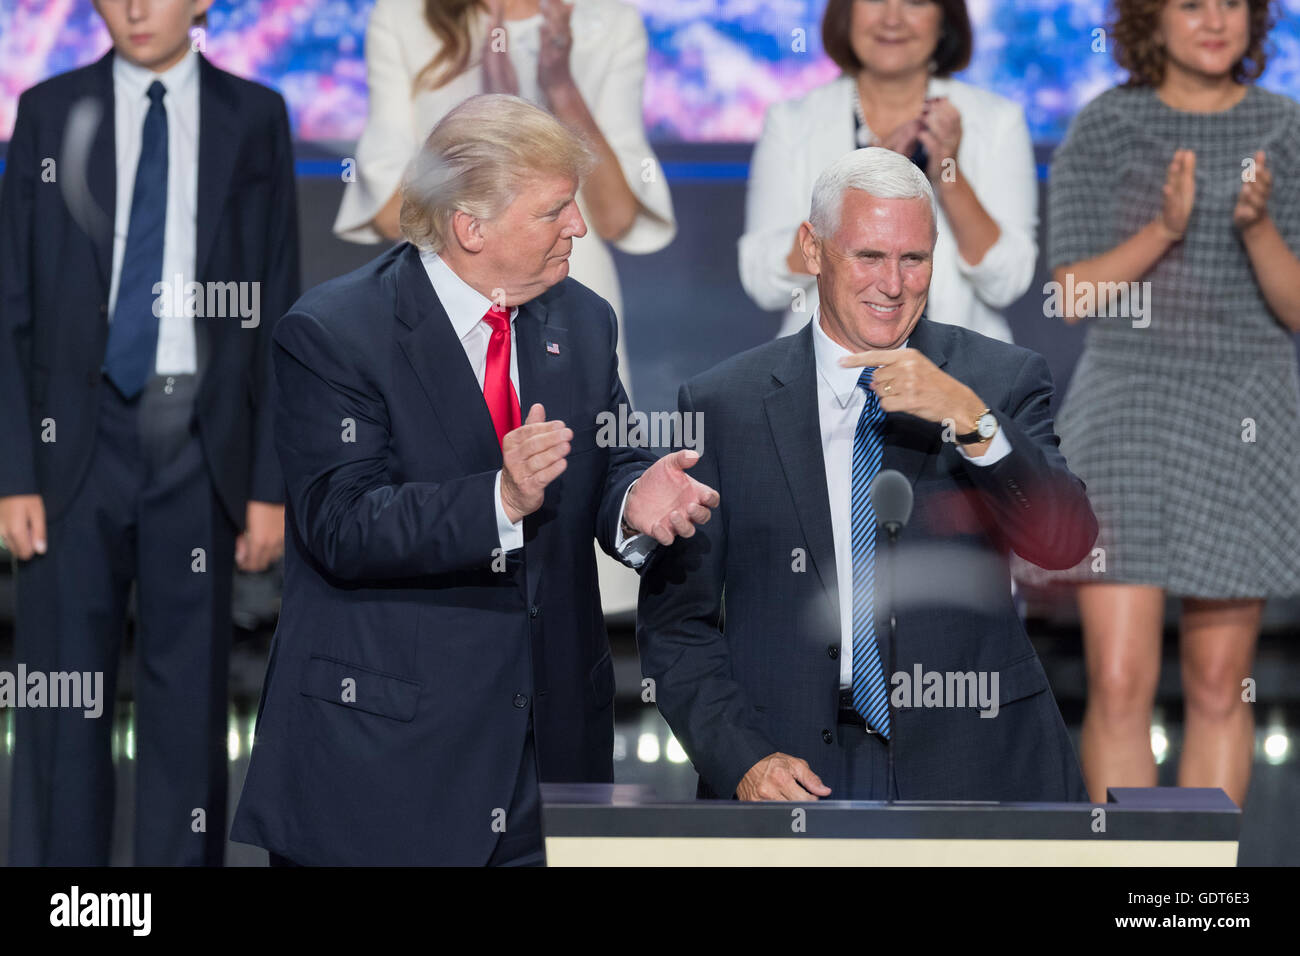 Cleveland, Ohio, USA. 21st July, 2016. GOP Presidential candidate Donald Trump stands with running mate Gov. Mike Pence as balloons and confetti drop after accepting the party nomination for president on the final day of the Republican National Convention July 21, 2016 in Cleveland, Ohio. Credit:  Planetpix/Alamy Live News Stock Photo